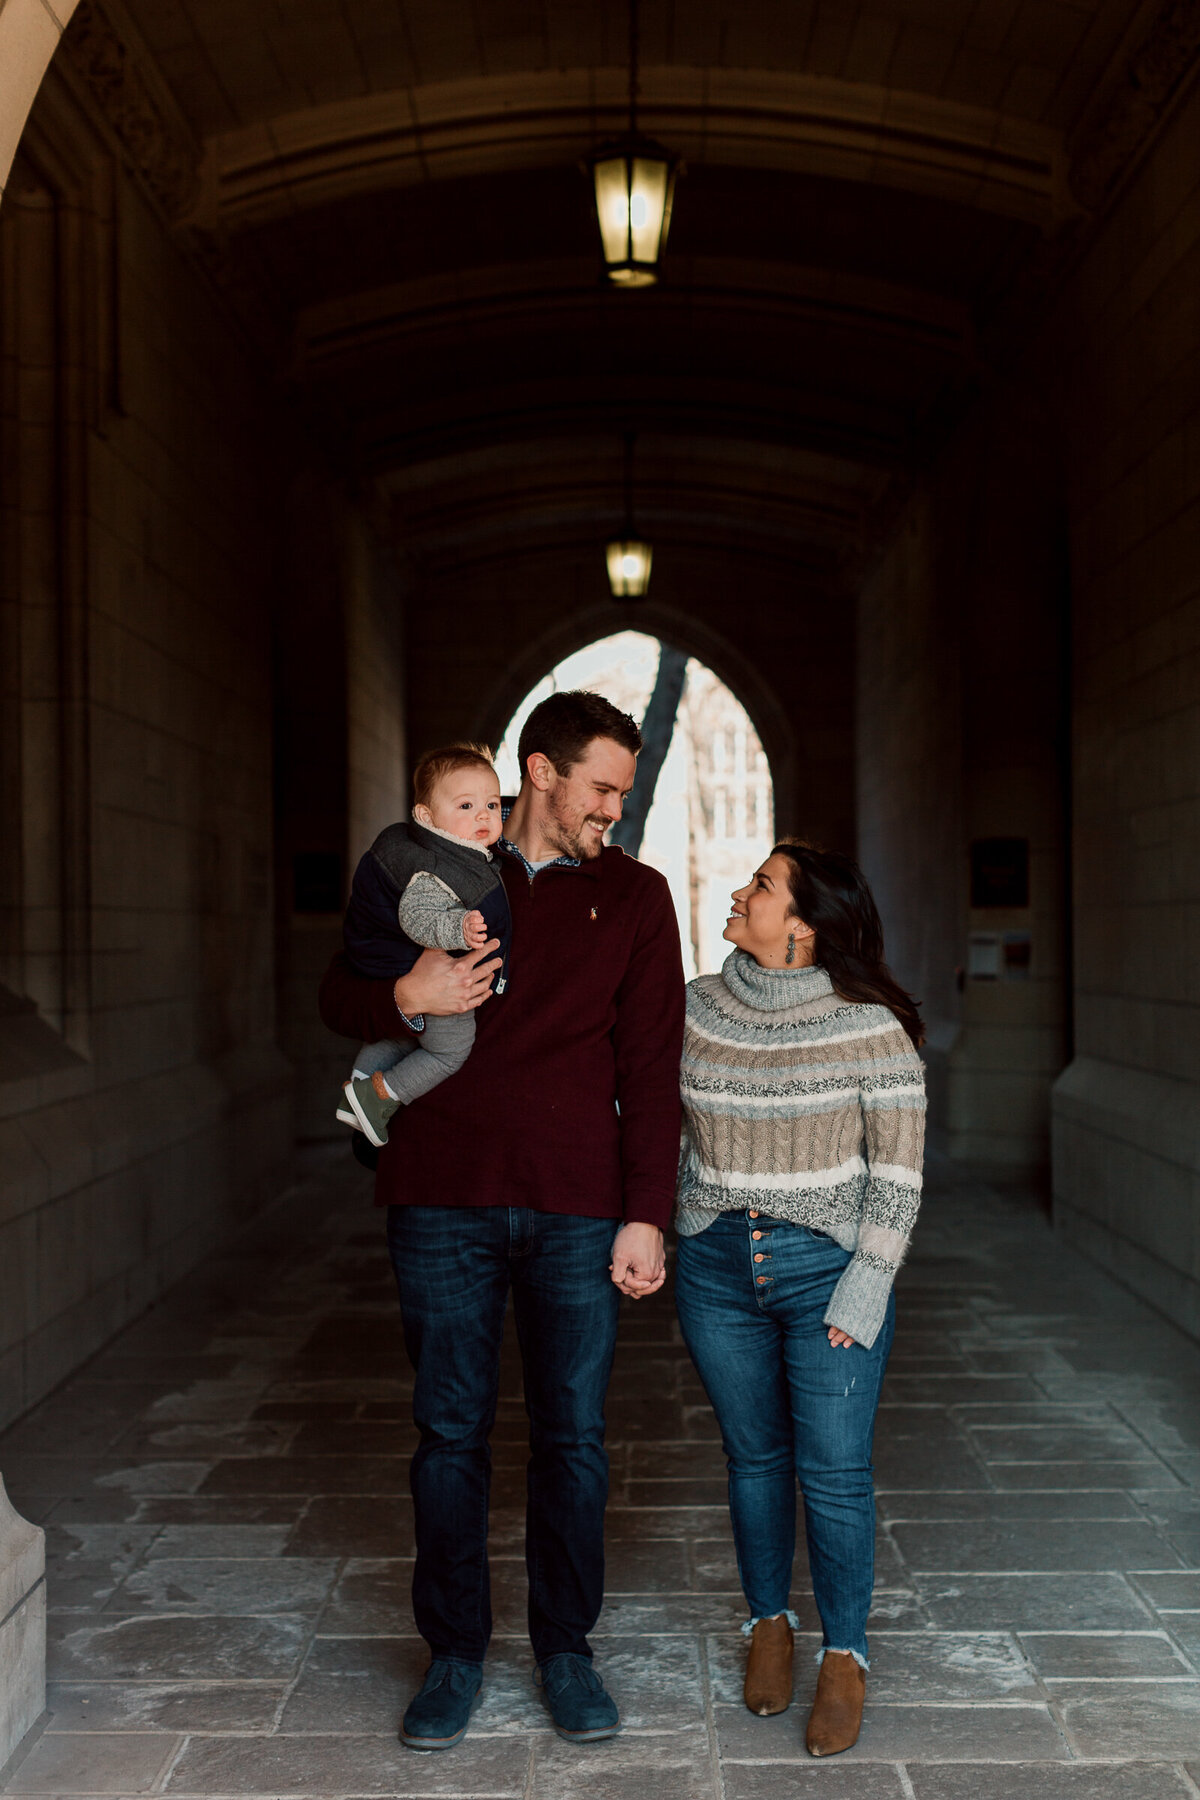 Cristao-Family-Session-University-of-Chicago-44